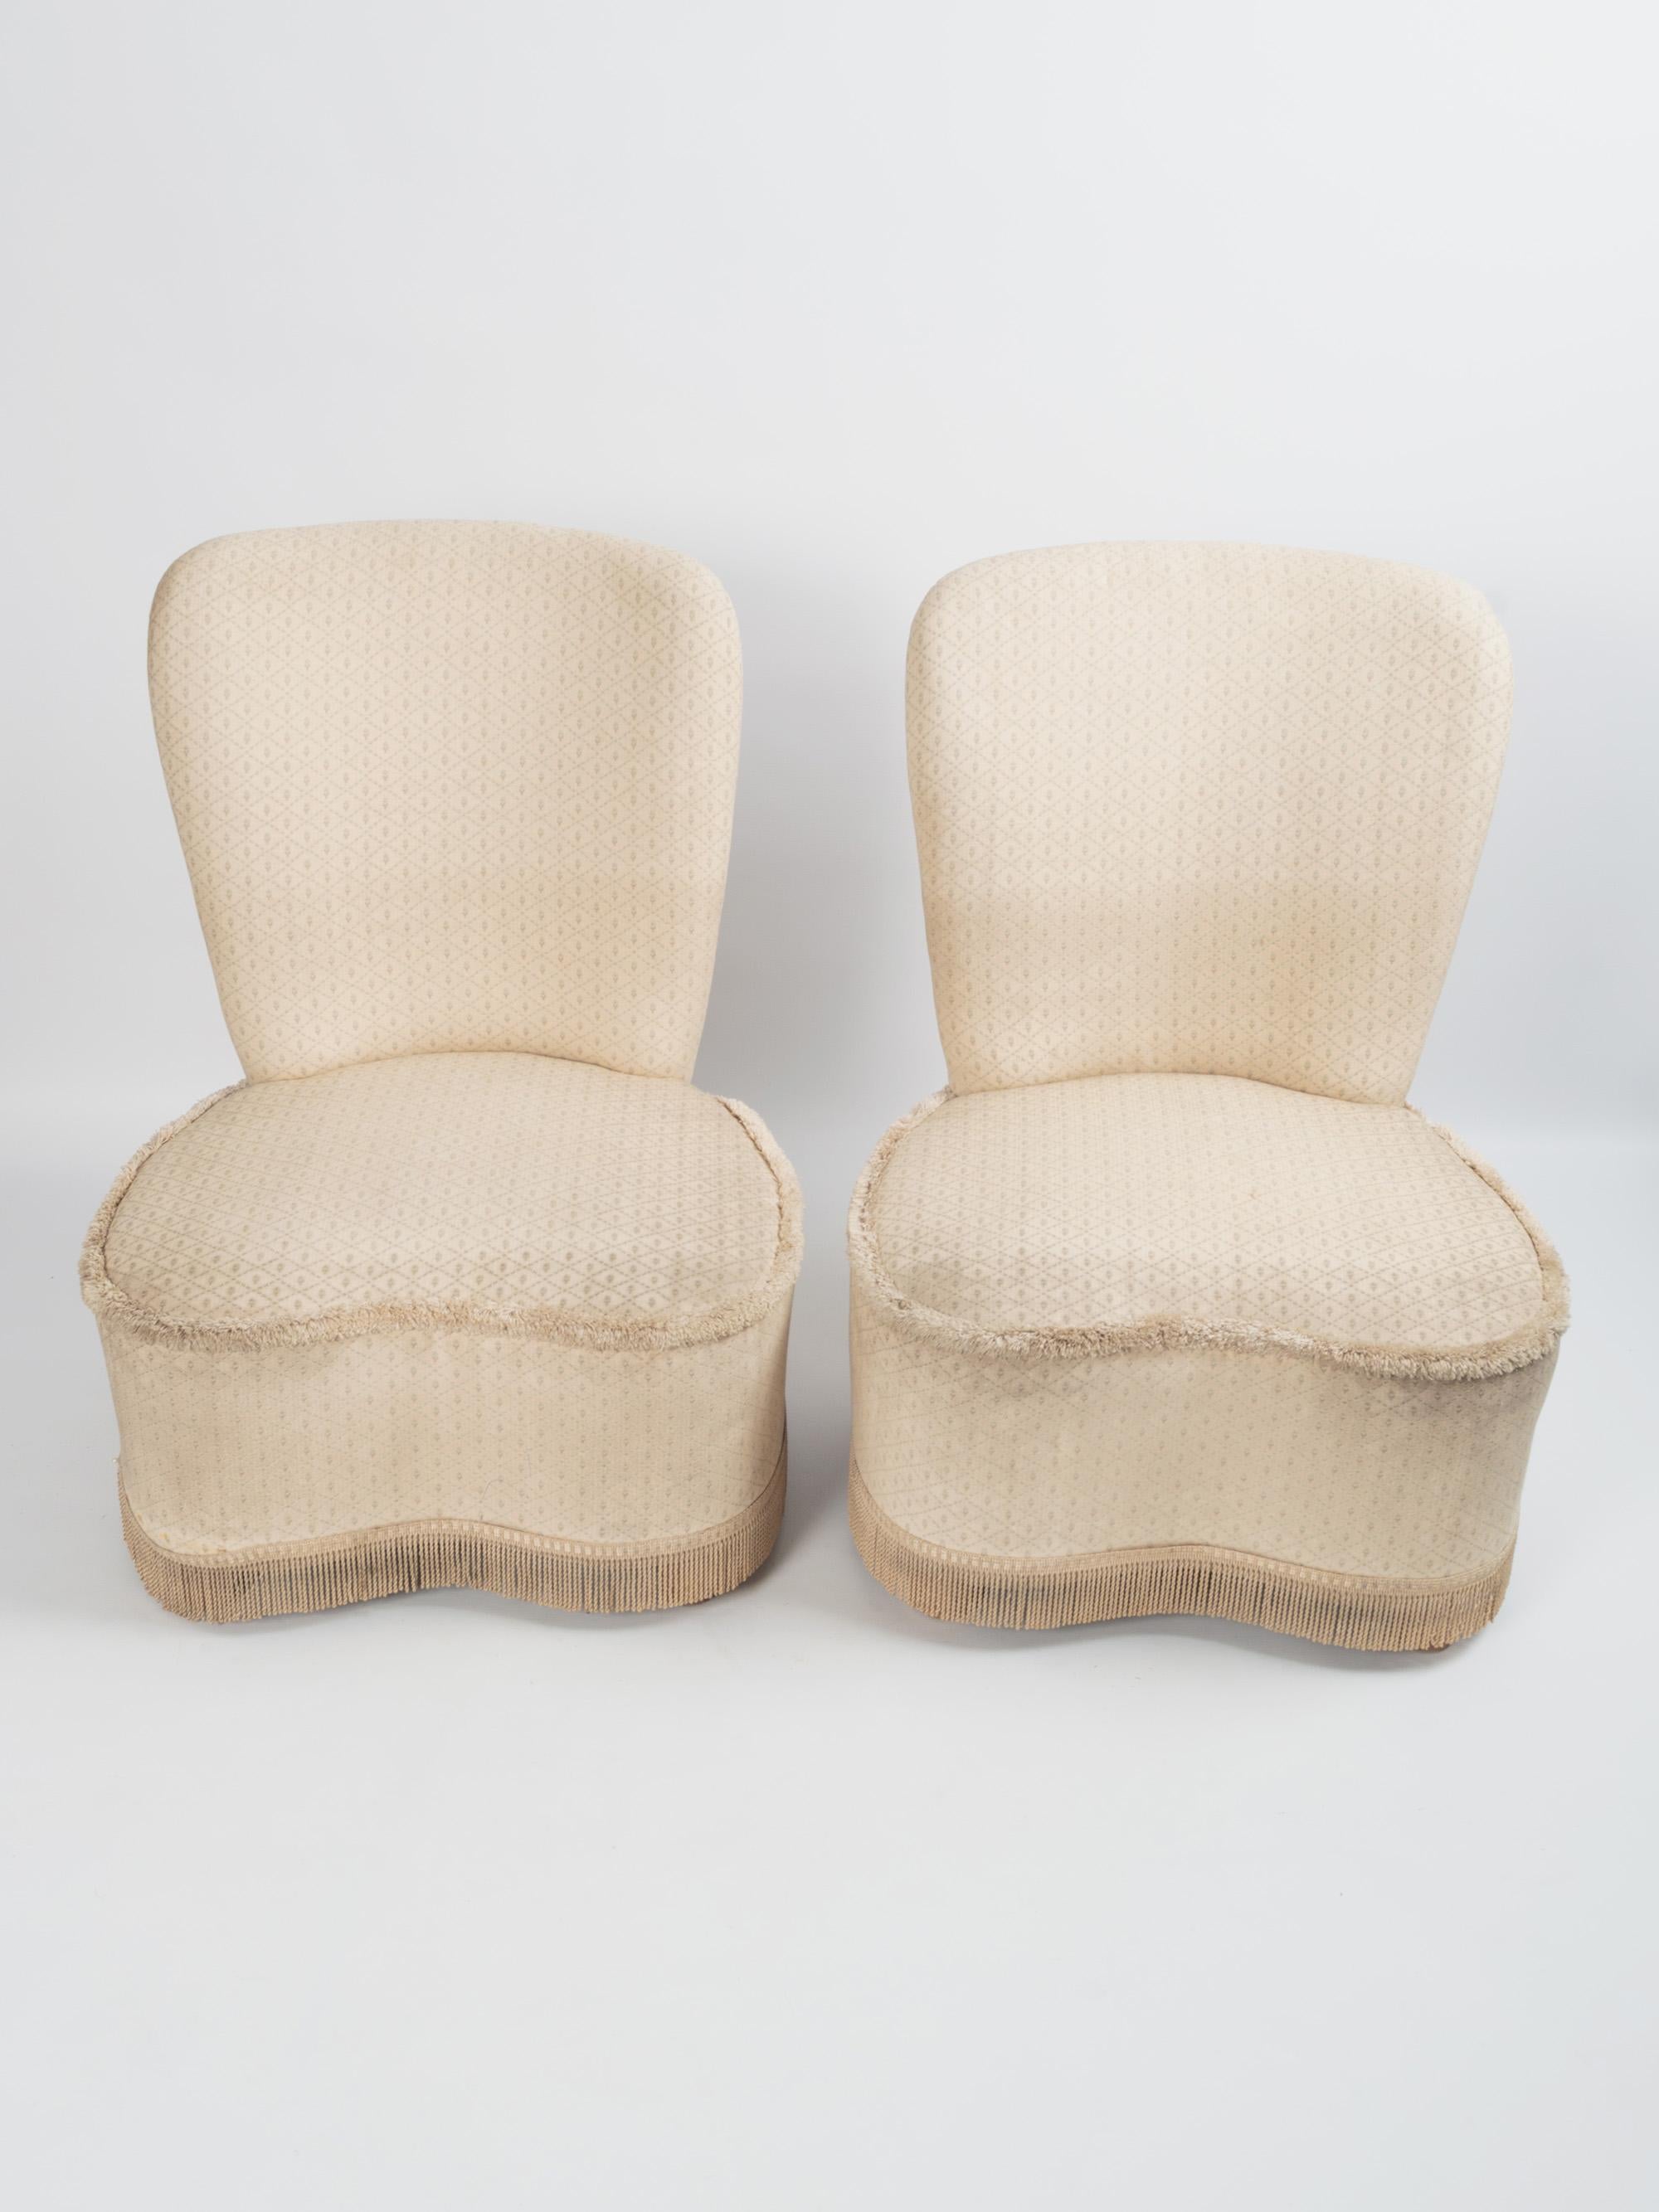 Pair of French Art Deco Upholstered Boudoir Chairs, C.1940 For Sale 3